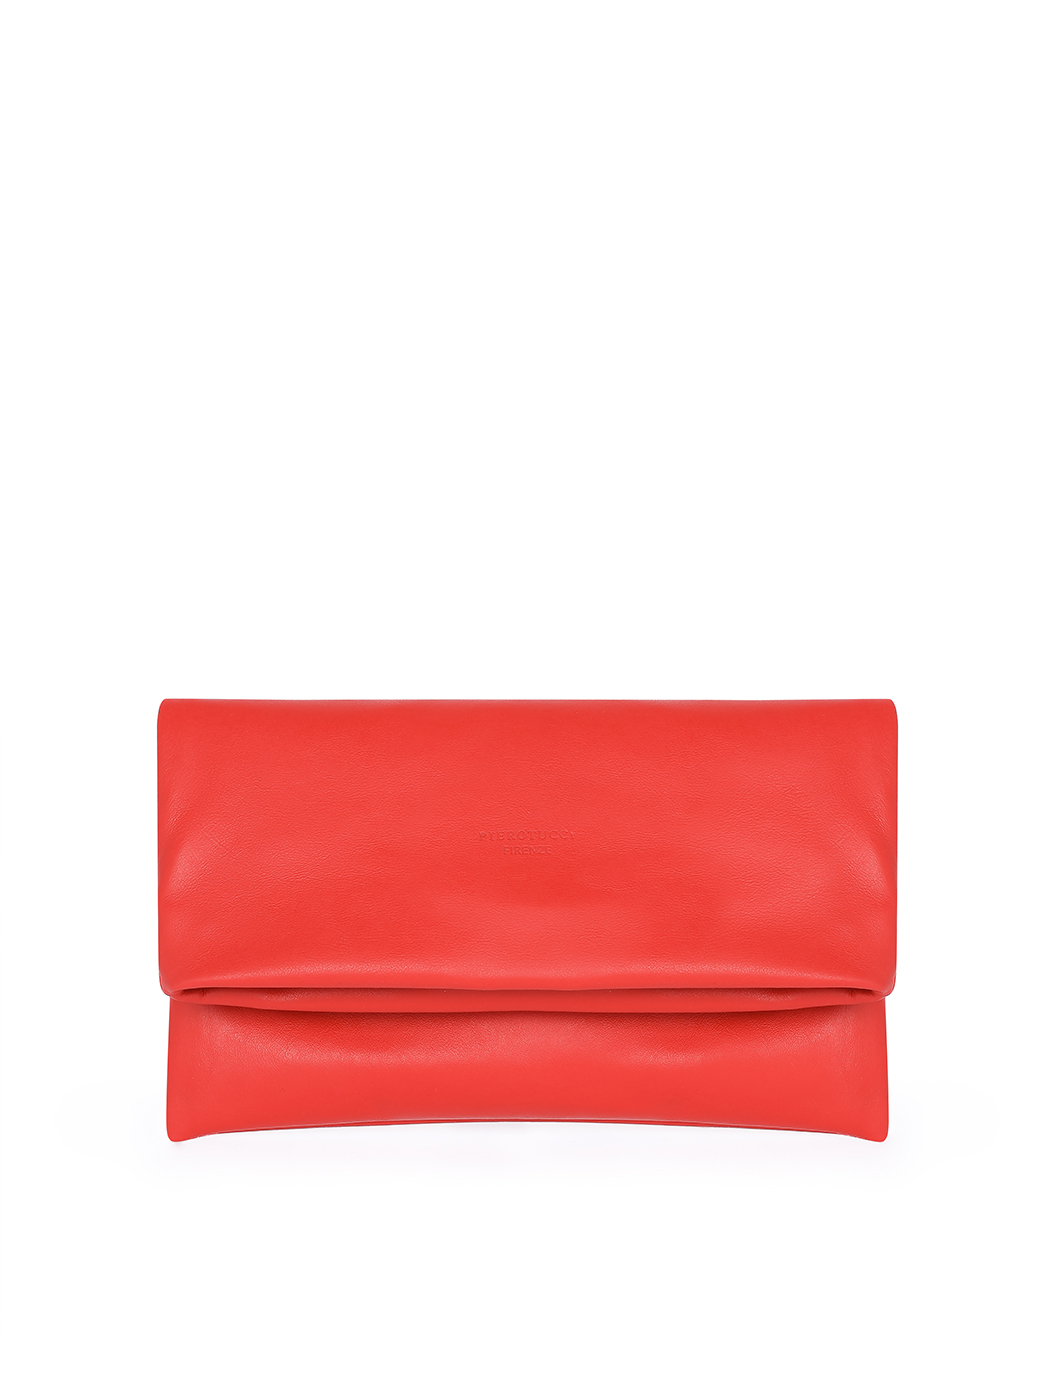 Convertible Crossbody and Clutch Purse Red